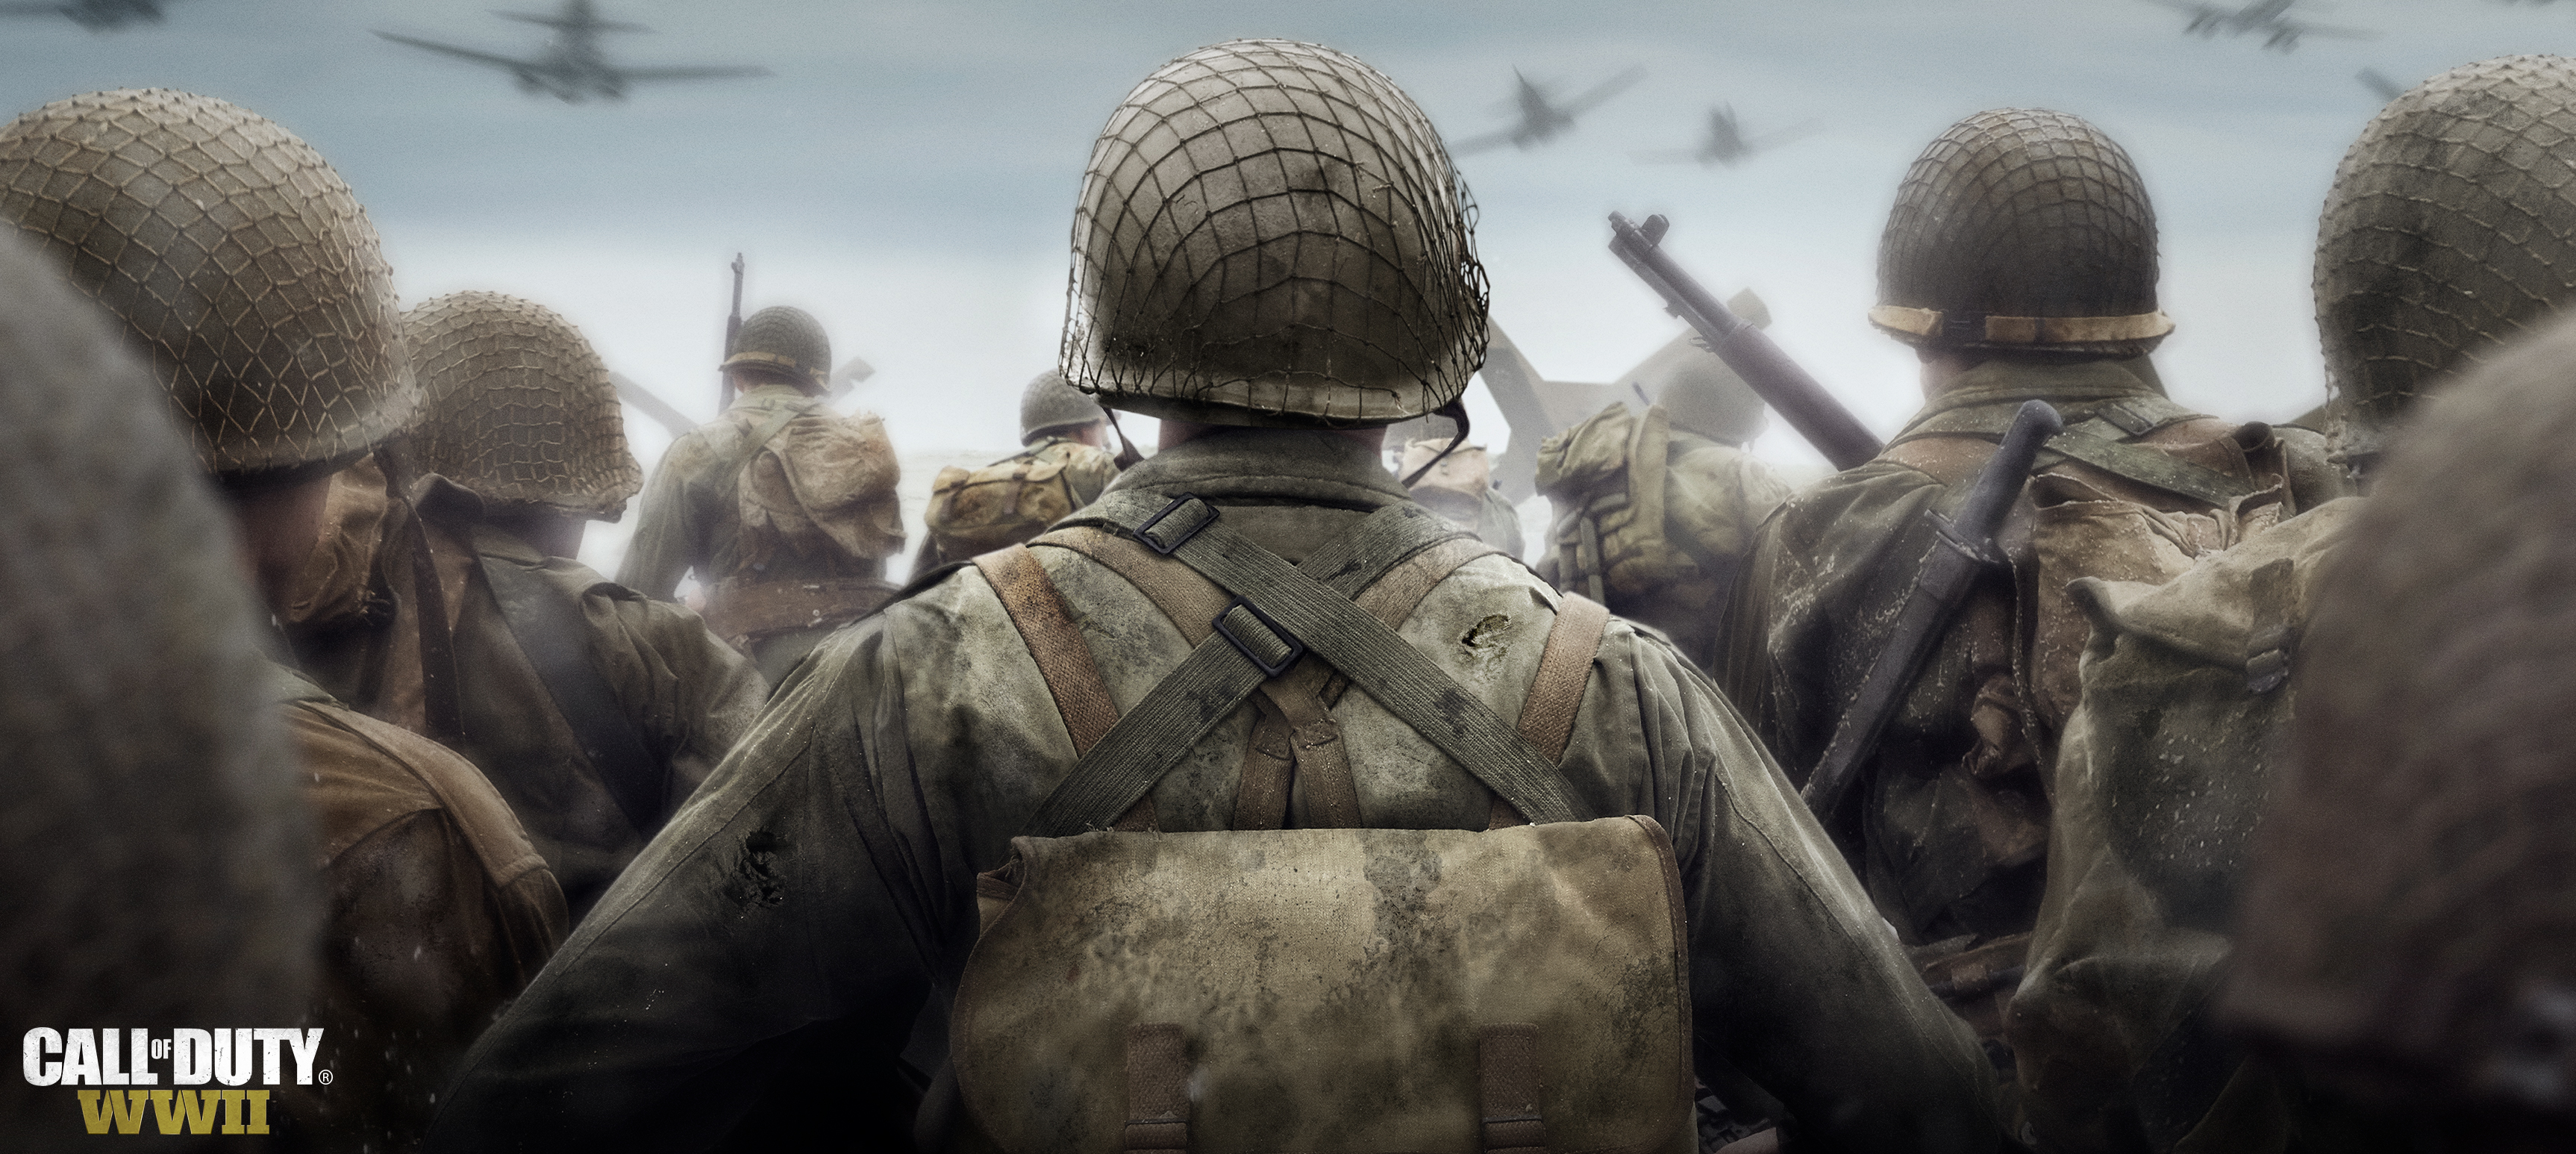 Best Mobile Call Of Duty: Wwii Backgrounds